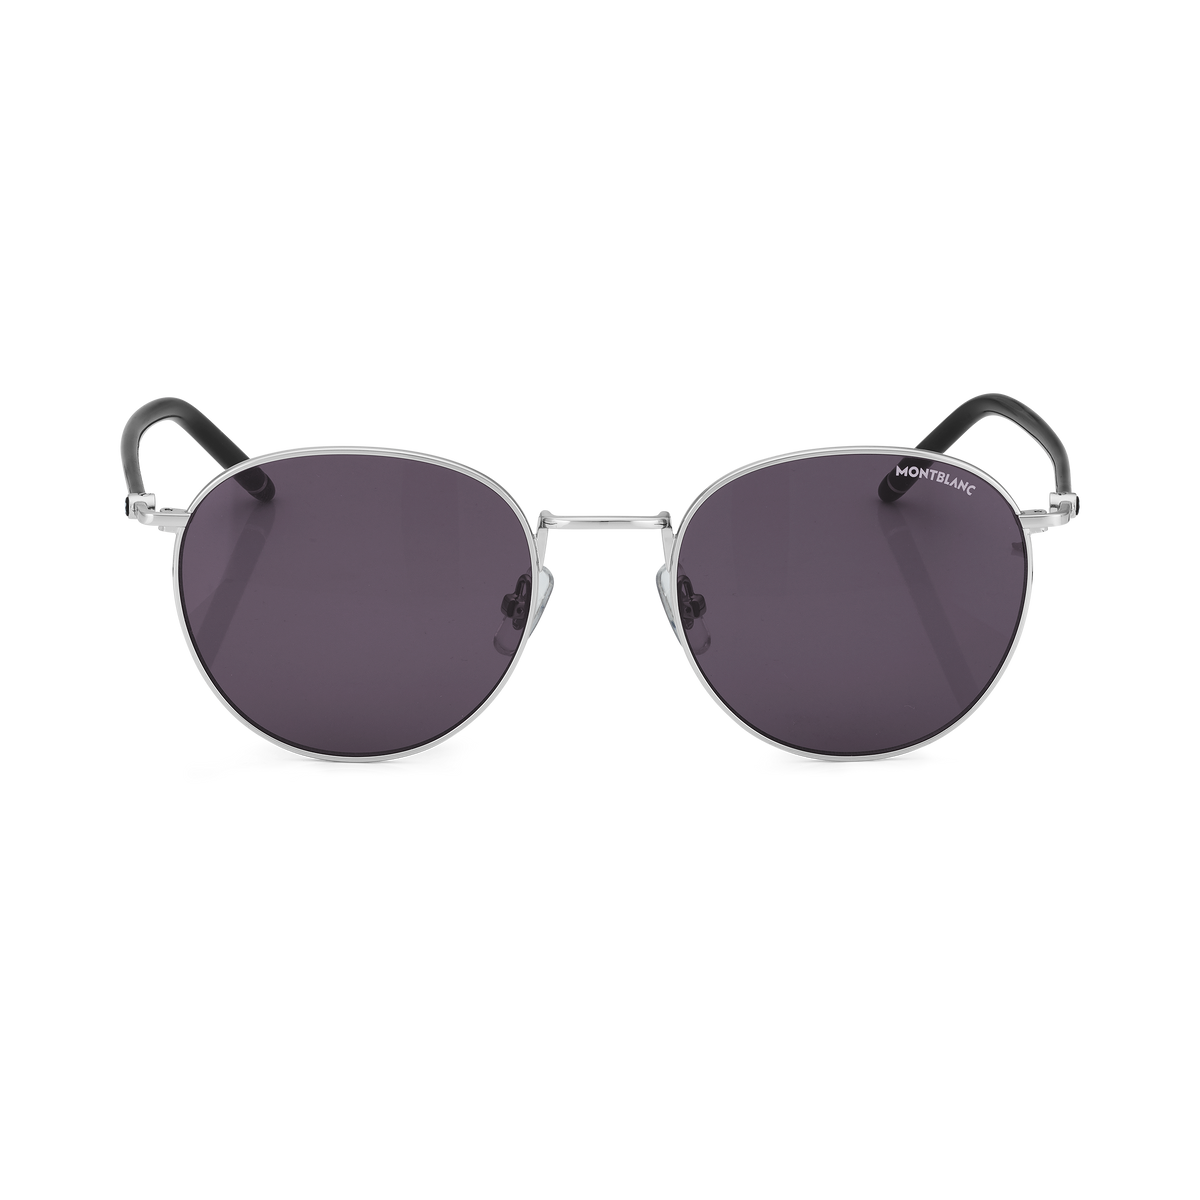 Round Sunglasses with Silver-Colored Metal Frame